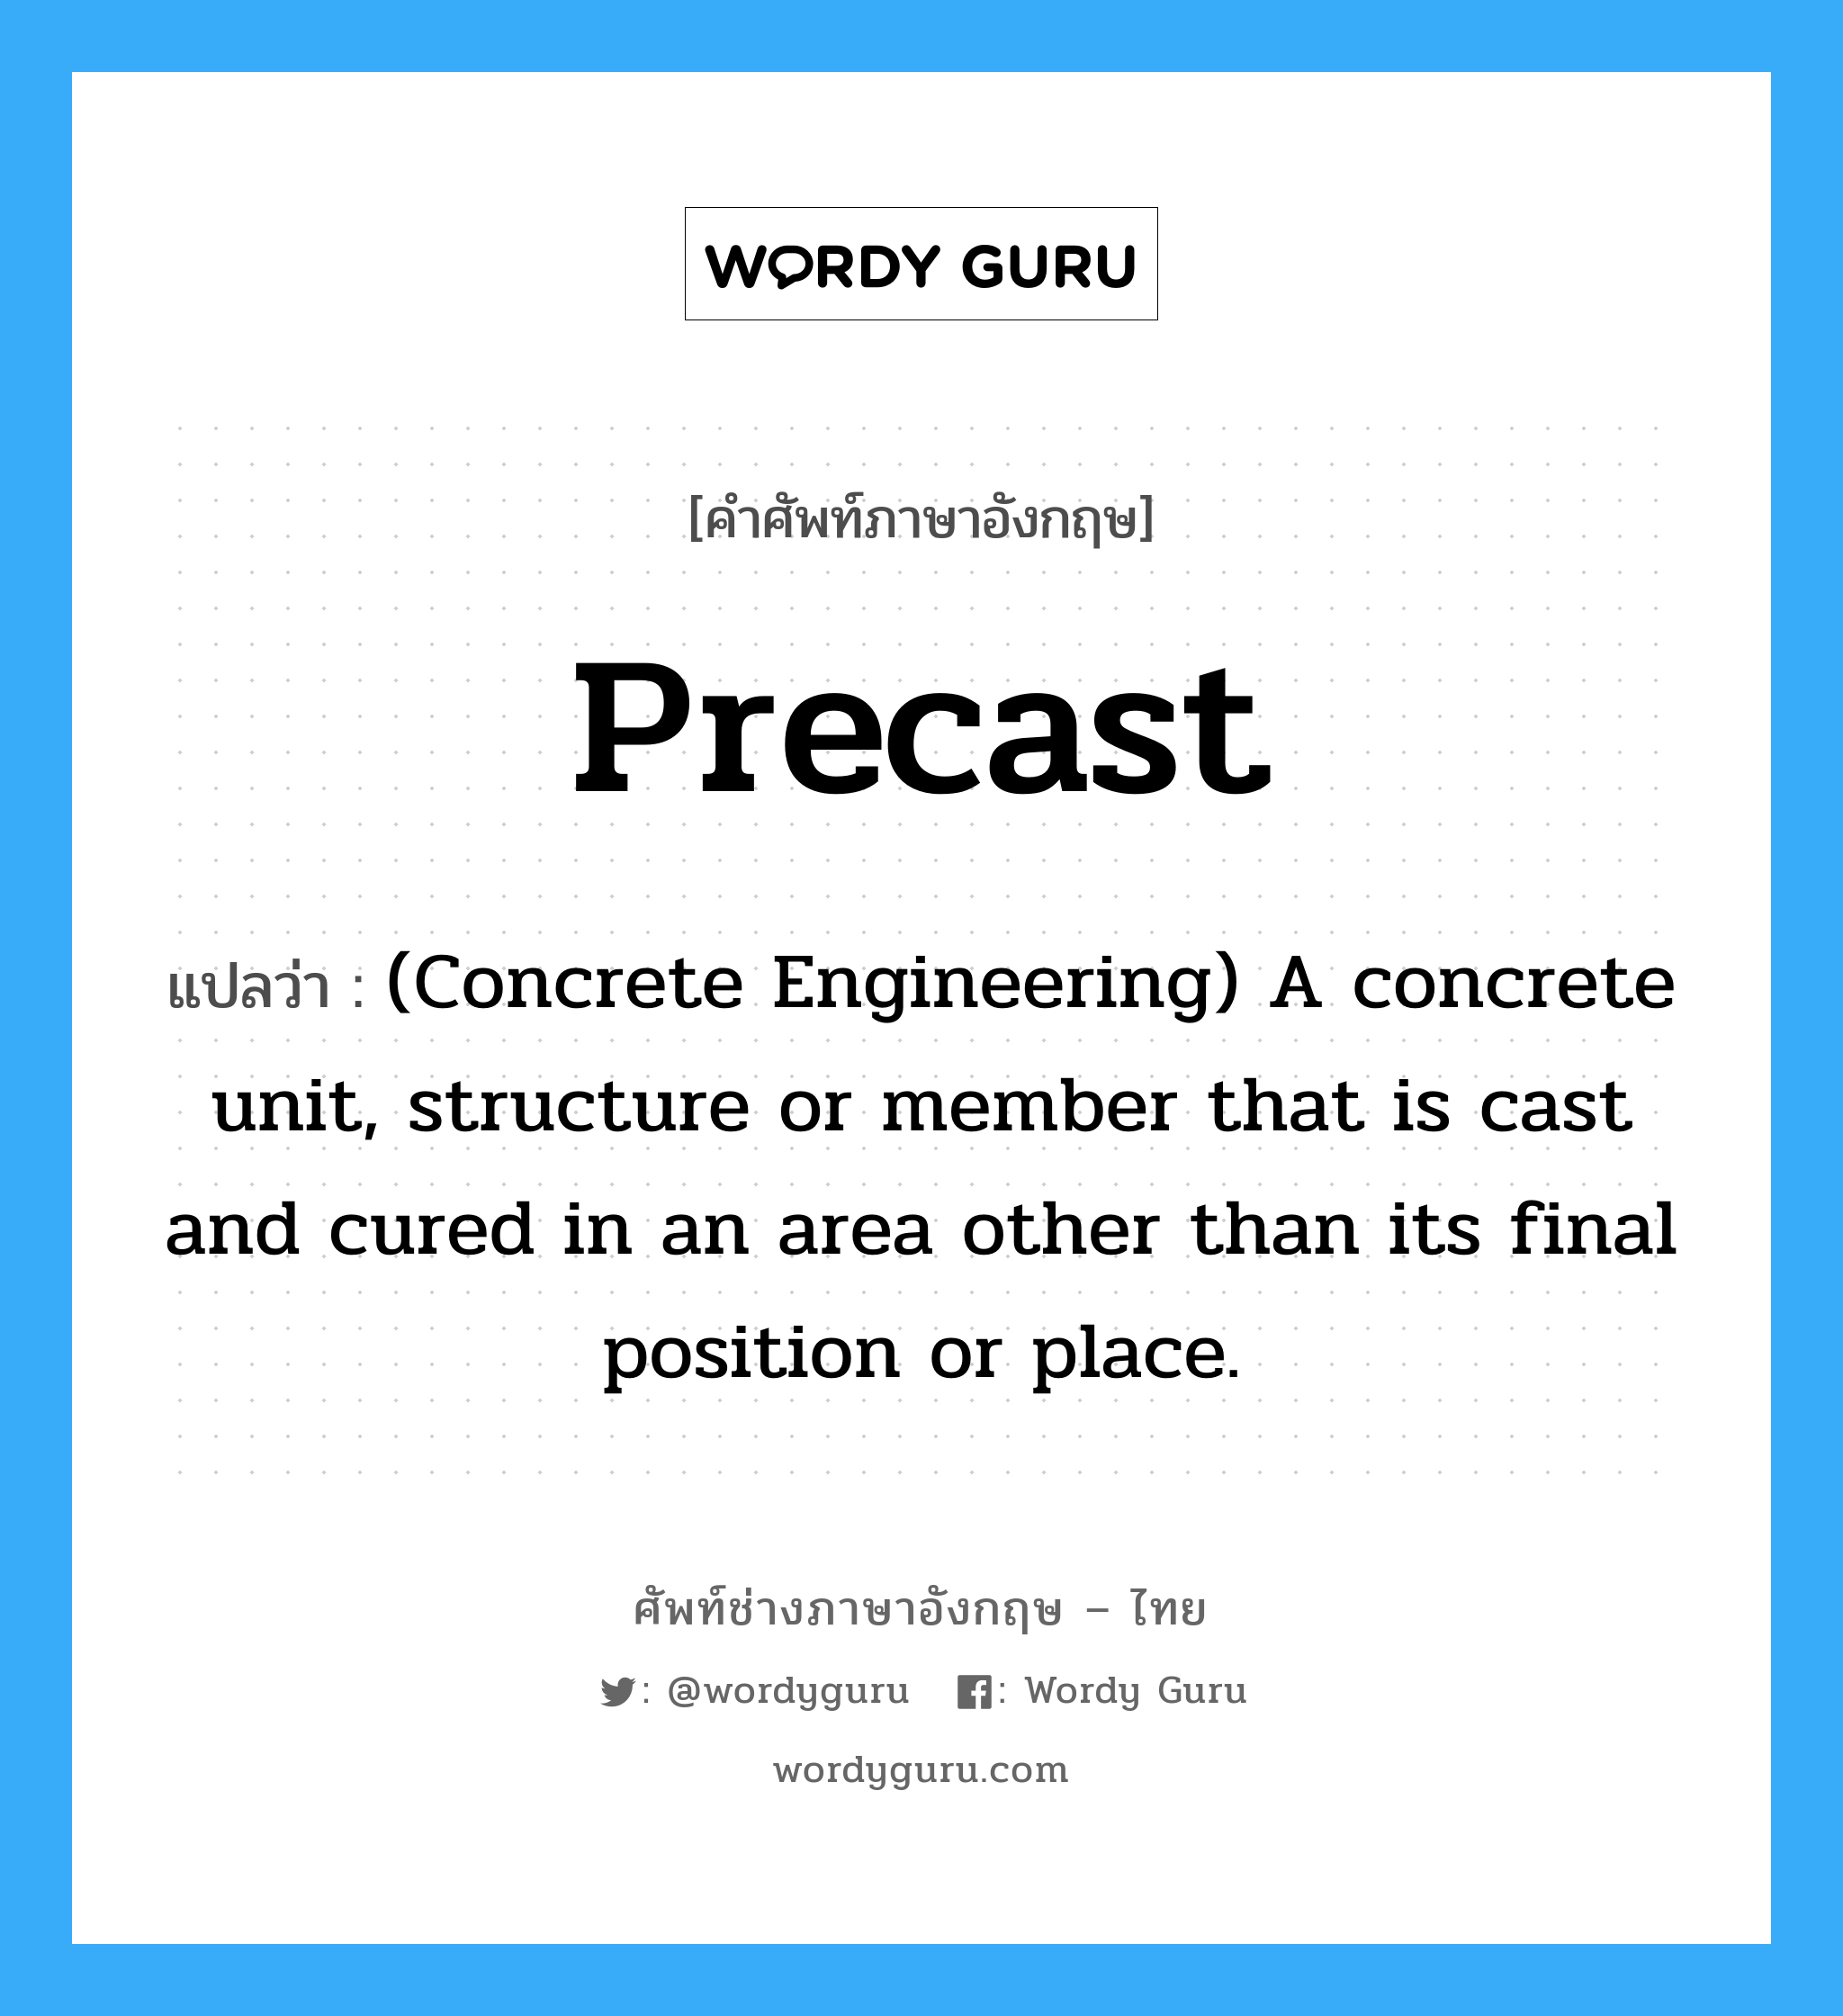 (Concrete Engineering) A concrete unit, structure or member that is cast and cured in an area other than its final position or place. ภาษาอังกฤษ?, คำศัพท์ช่างภาษาอังกฤษ - ไทย (Concrete Engineering) A concrete unit, structure or member that is cast and cured in an area other than its final position or place. คำศัพท์ภาษาอังกฤษ (Concrete Engineering) A concrete unit, structure or member that is cast and cured in an area other than its final position or place. แปลว่า Precast